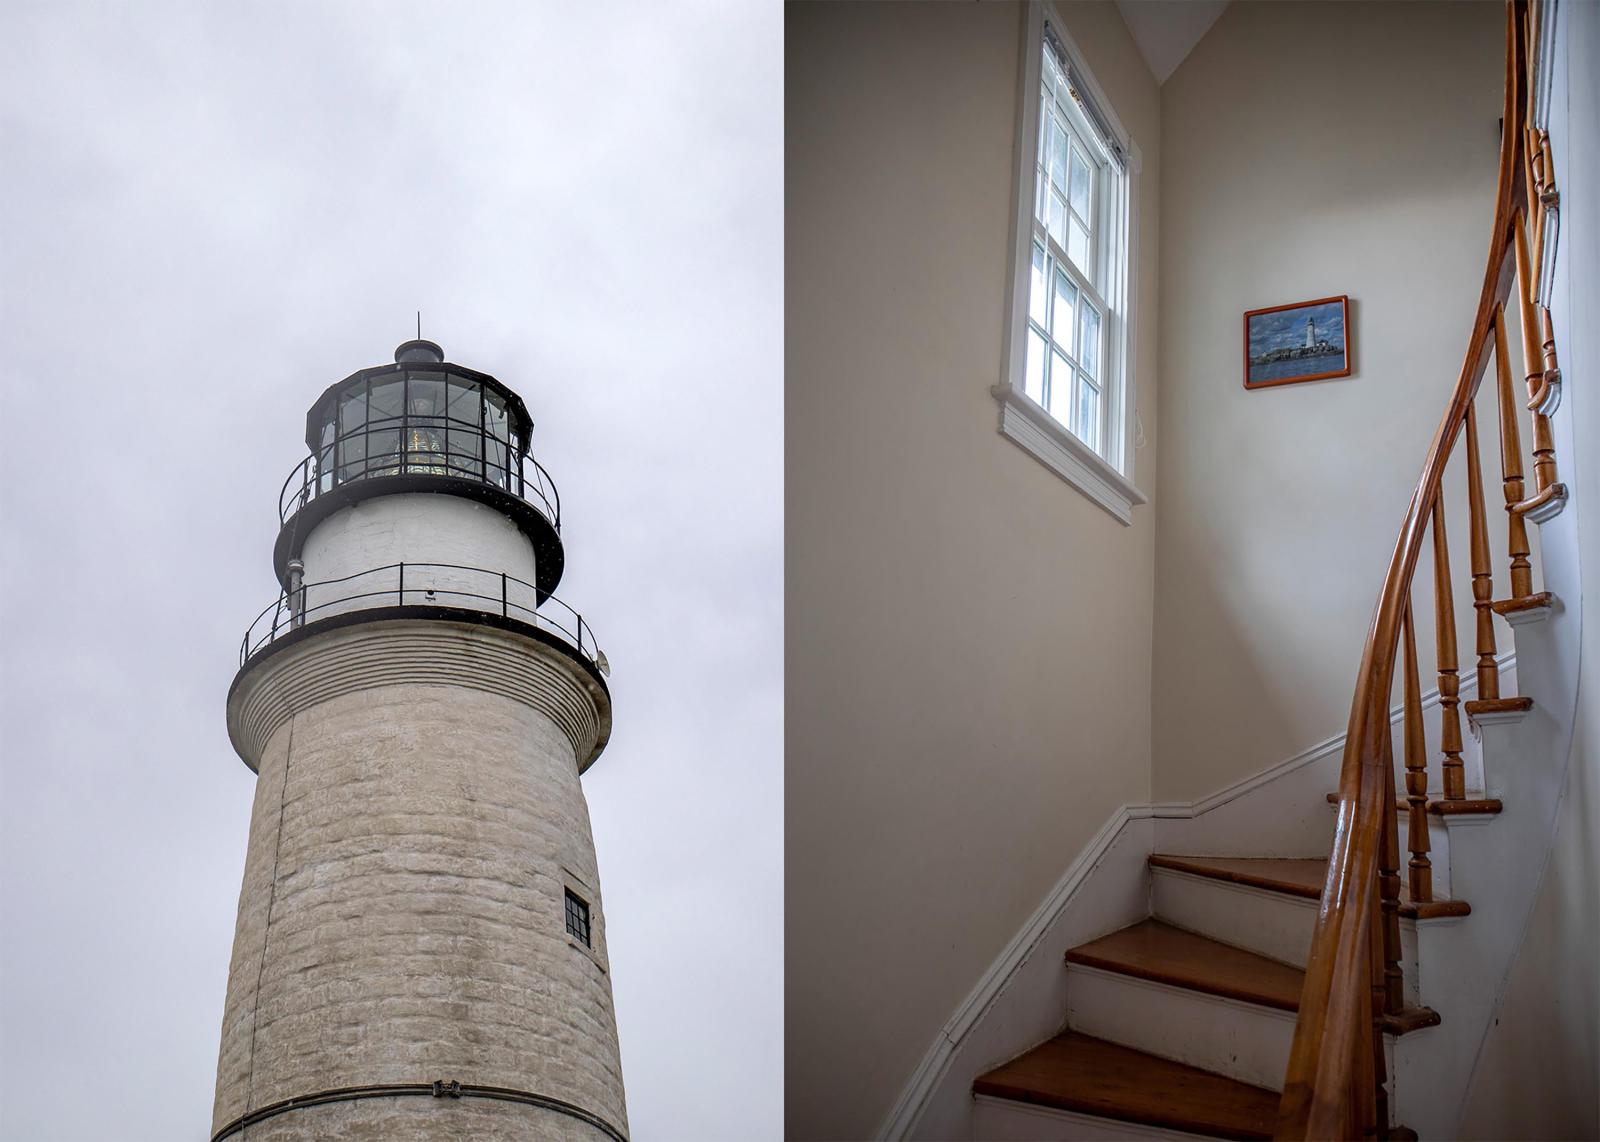 First photo: The Boston Light g...f problems with the aging site.